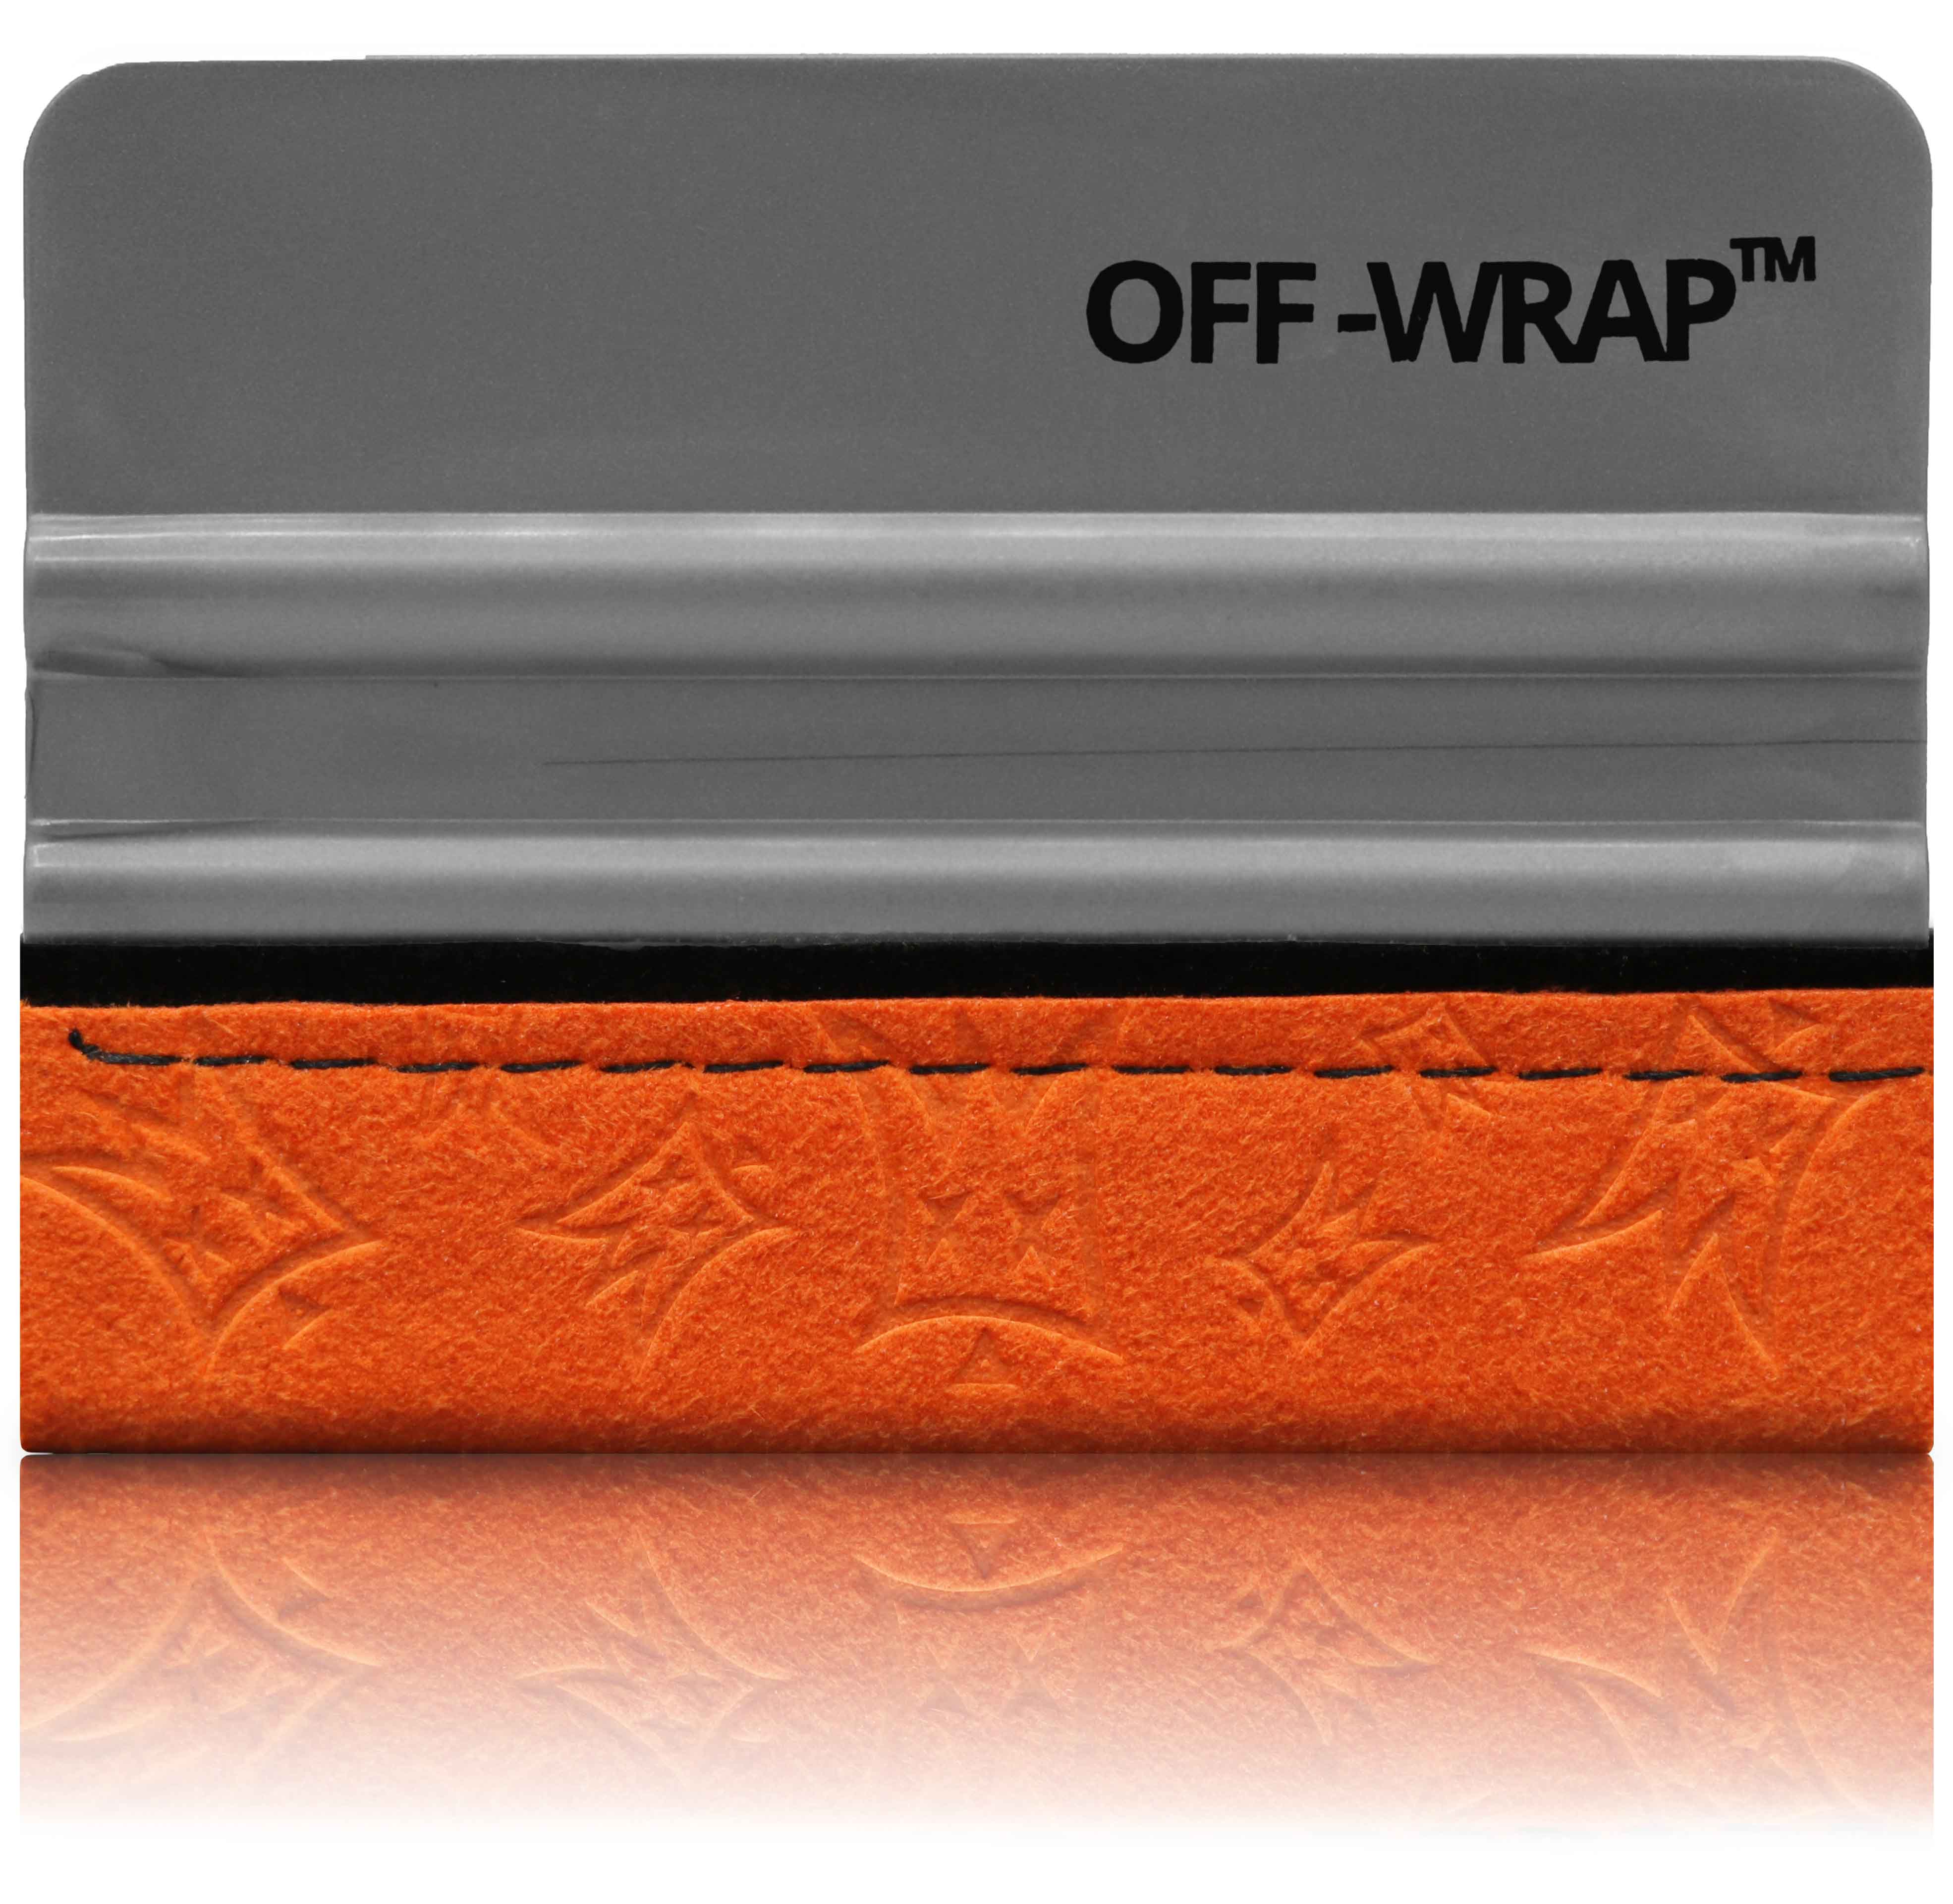 Off-Wrap™ Squeegee Lube + Squeegees Kit